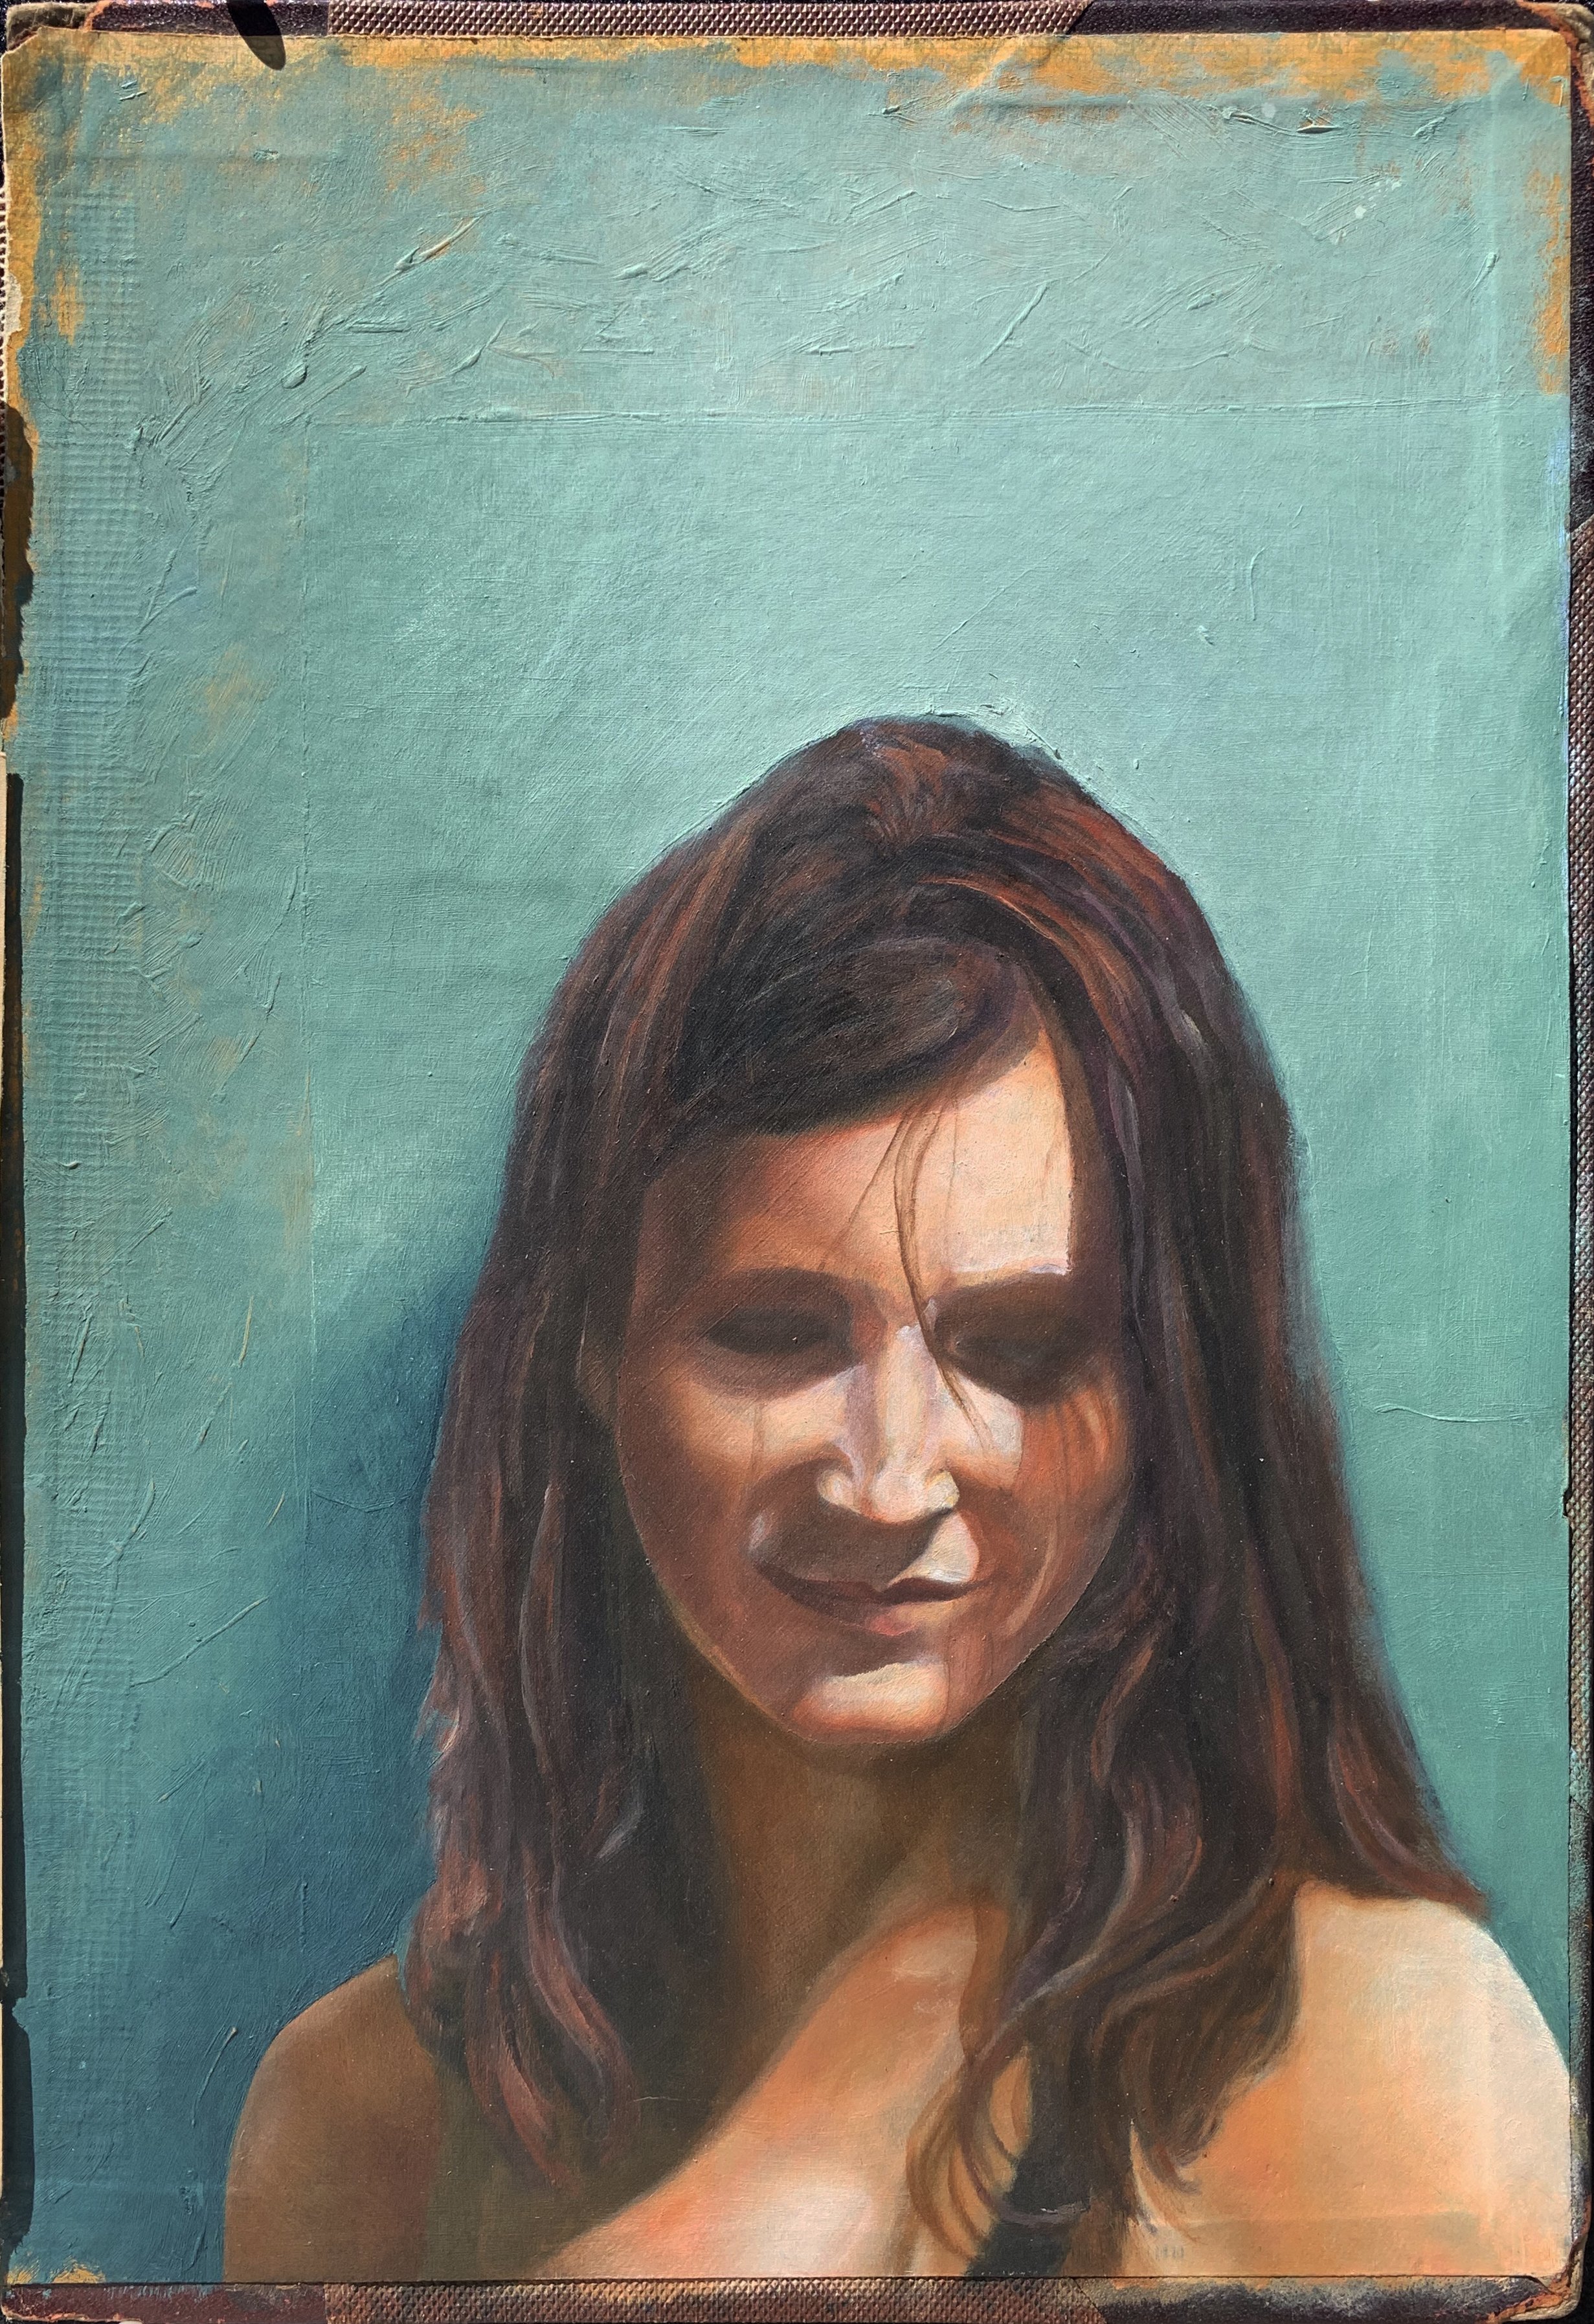   CLAUDIA 1   6.5” x 9”  Oil on Leather-bound Book Cover       